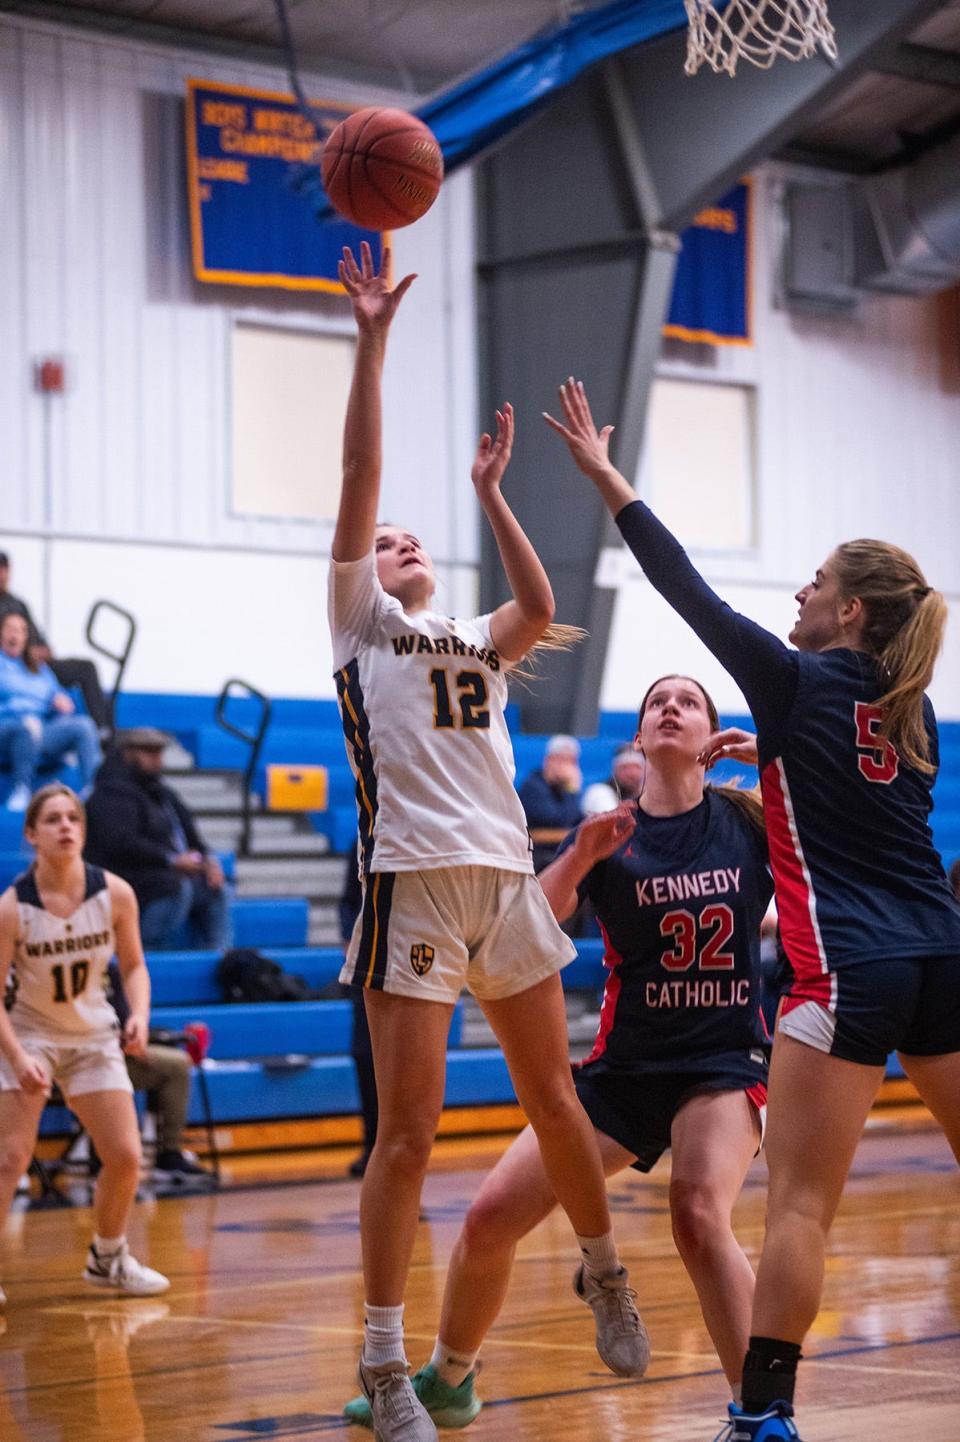 Lourdes' Sofi Pelish, center, shoots during the girls basketball game at Our Lady of Lourdes High School in Poughkeepsie, NY on Saturday, December 9, 2023. Loudes defeated Kennedy 65-38. KELLY MARSH/FOR THE POUGHKEEPSIE JOURNAL